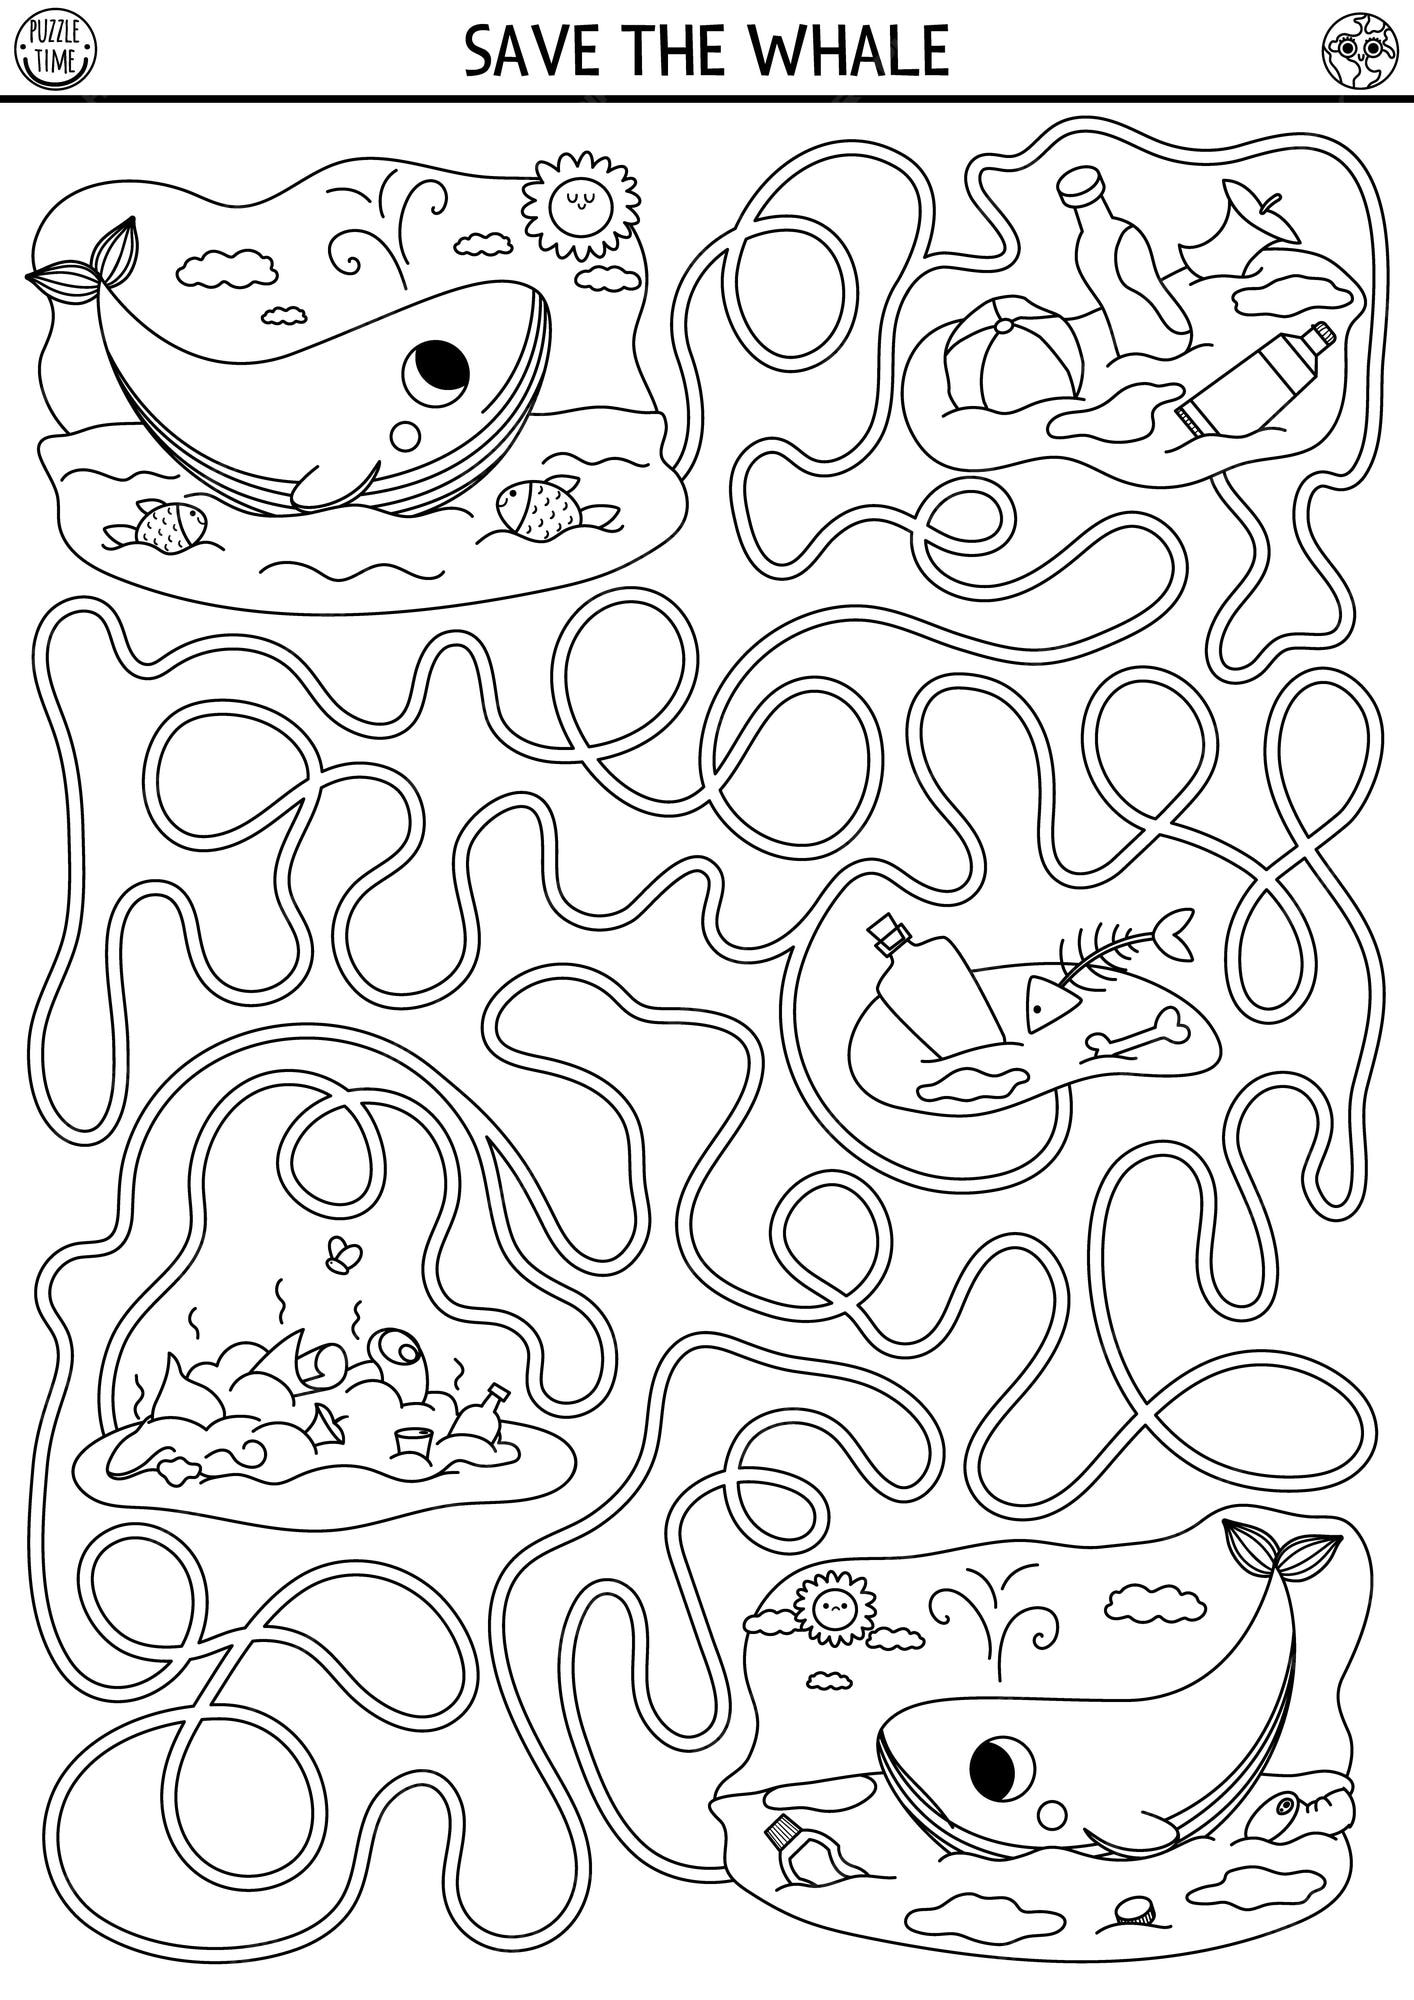 Premium vector ecological black and white maze for children with endangered animal concept save the whale game earth day preschool activity eco awareness labyrinth coloring page nature protection printablexa